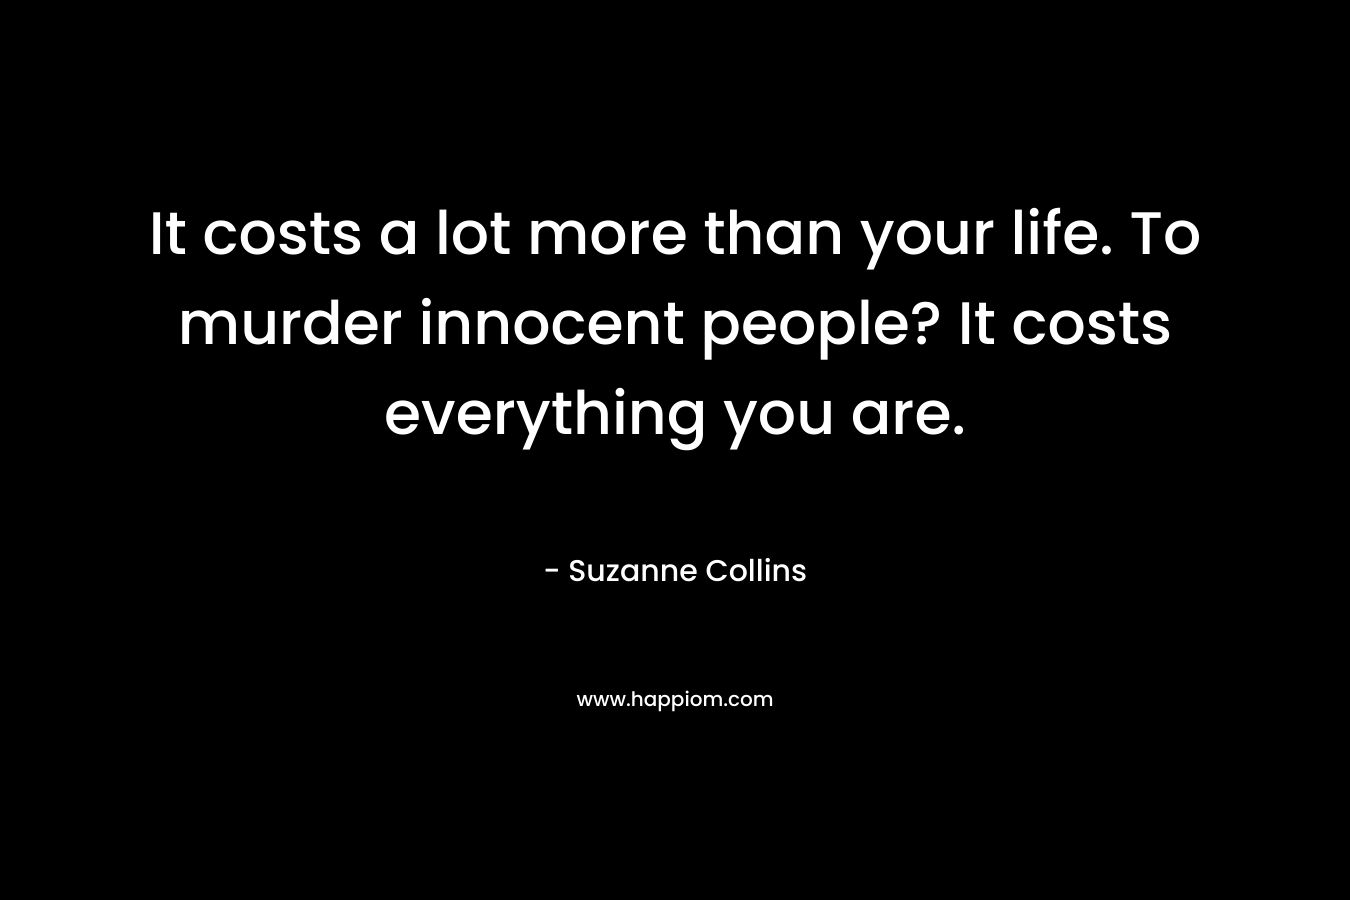 It costs a lot more than your life. To murder innocent people? It costs everything you are. – Suzanne Collins